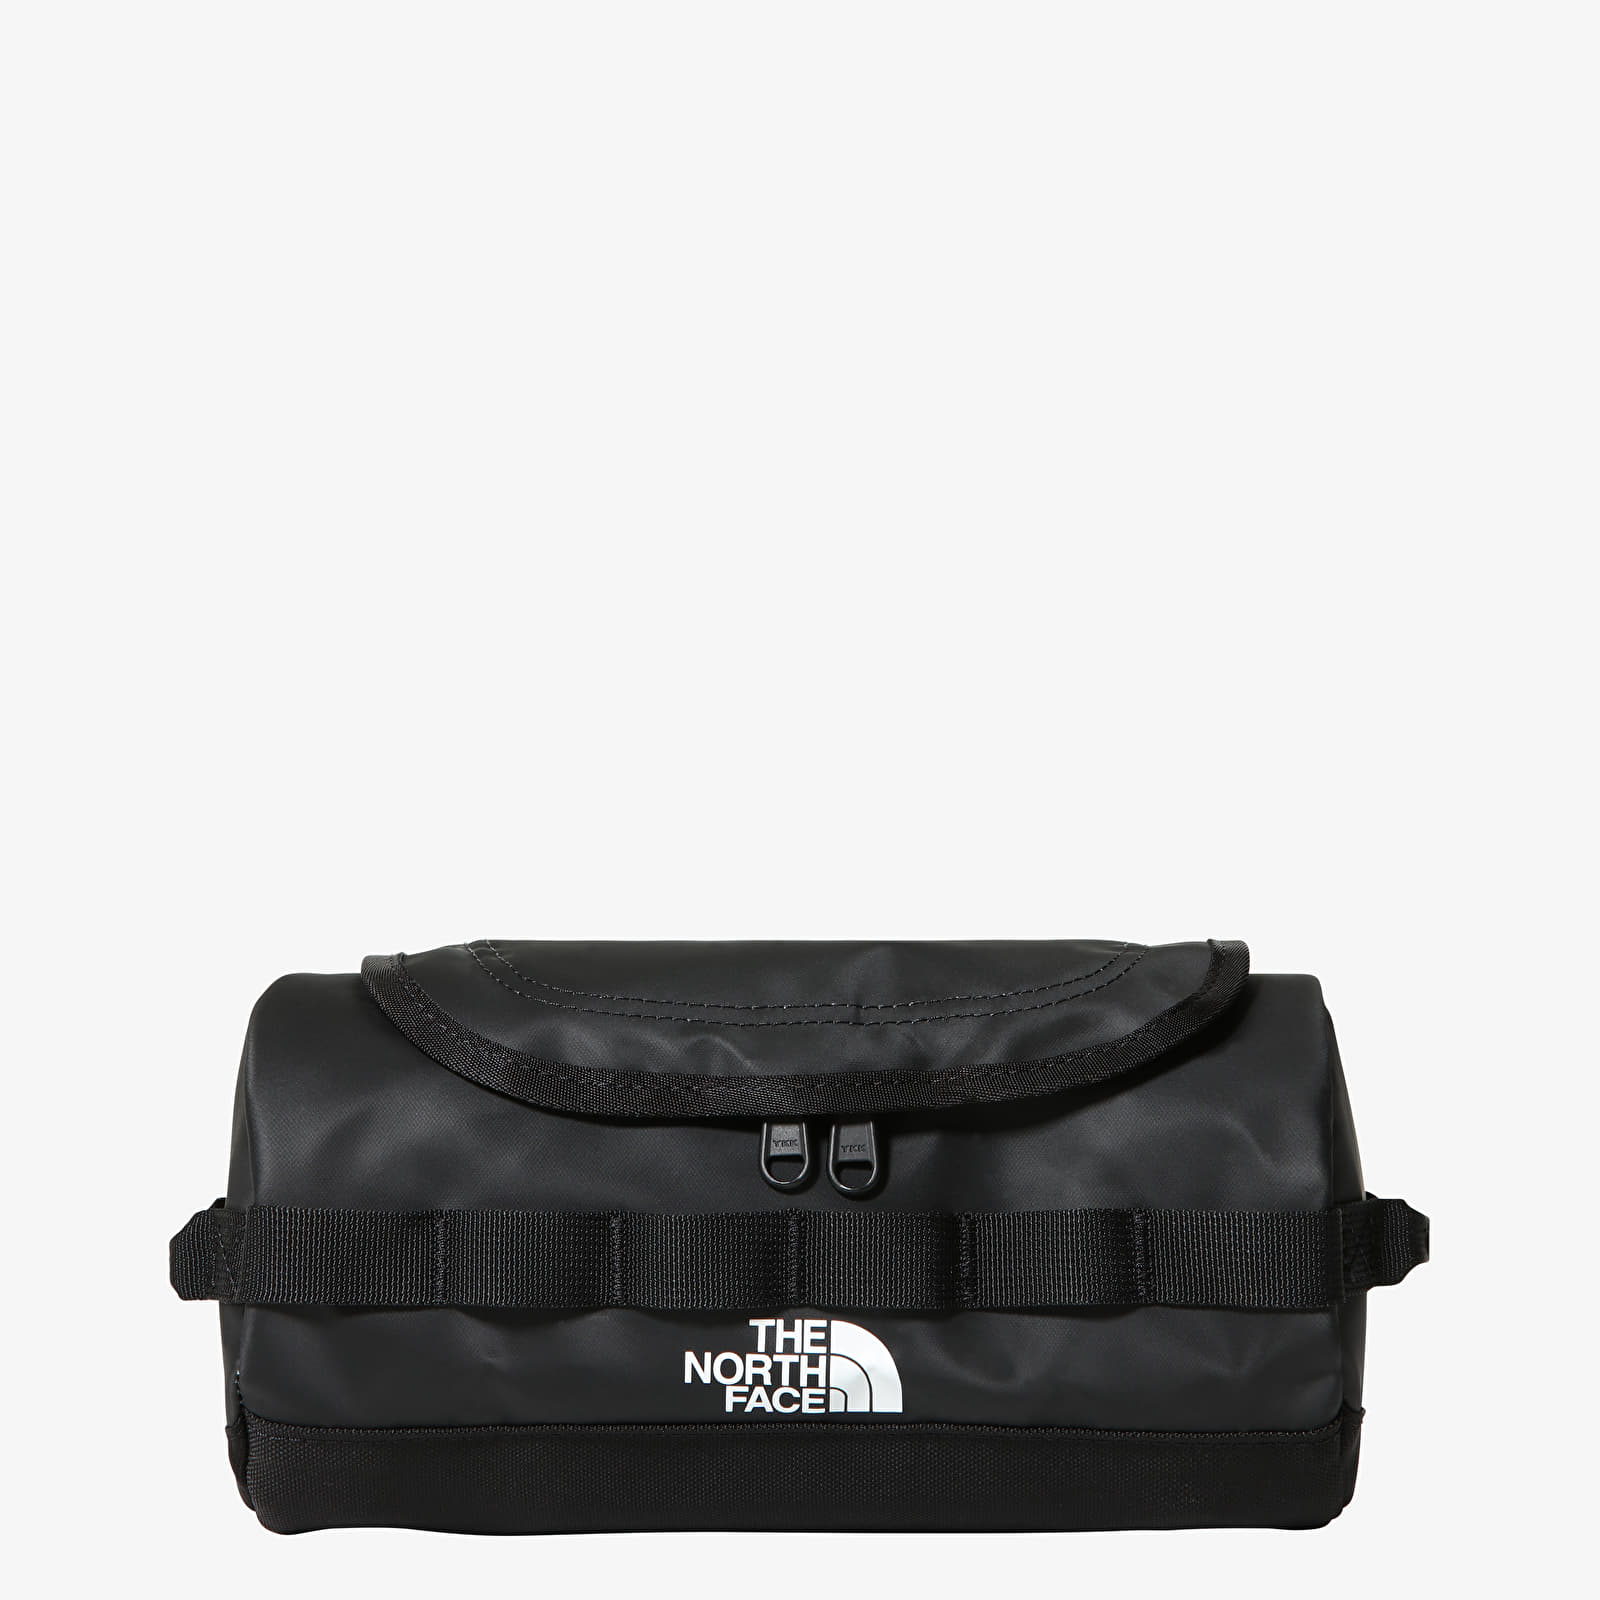 The North Face - Bc Travel Canister S Tnf Black/Tnf White - Bags